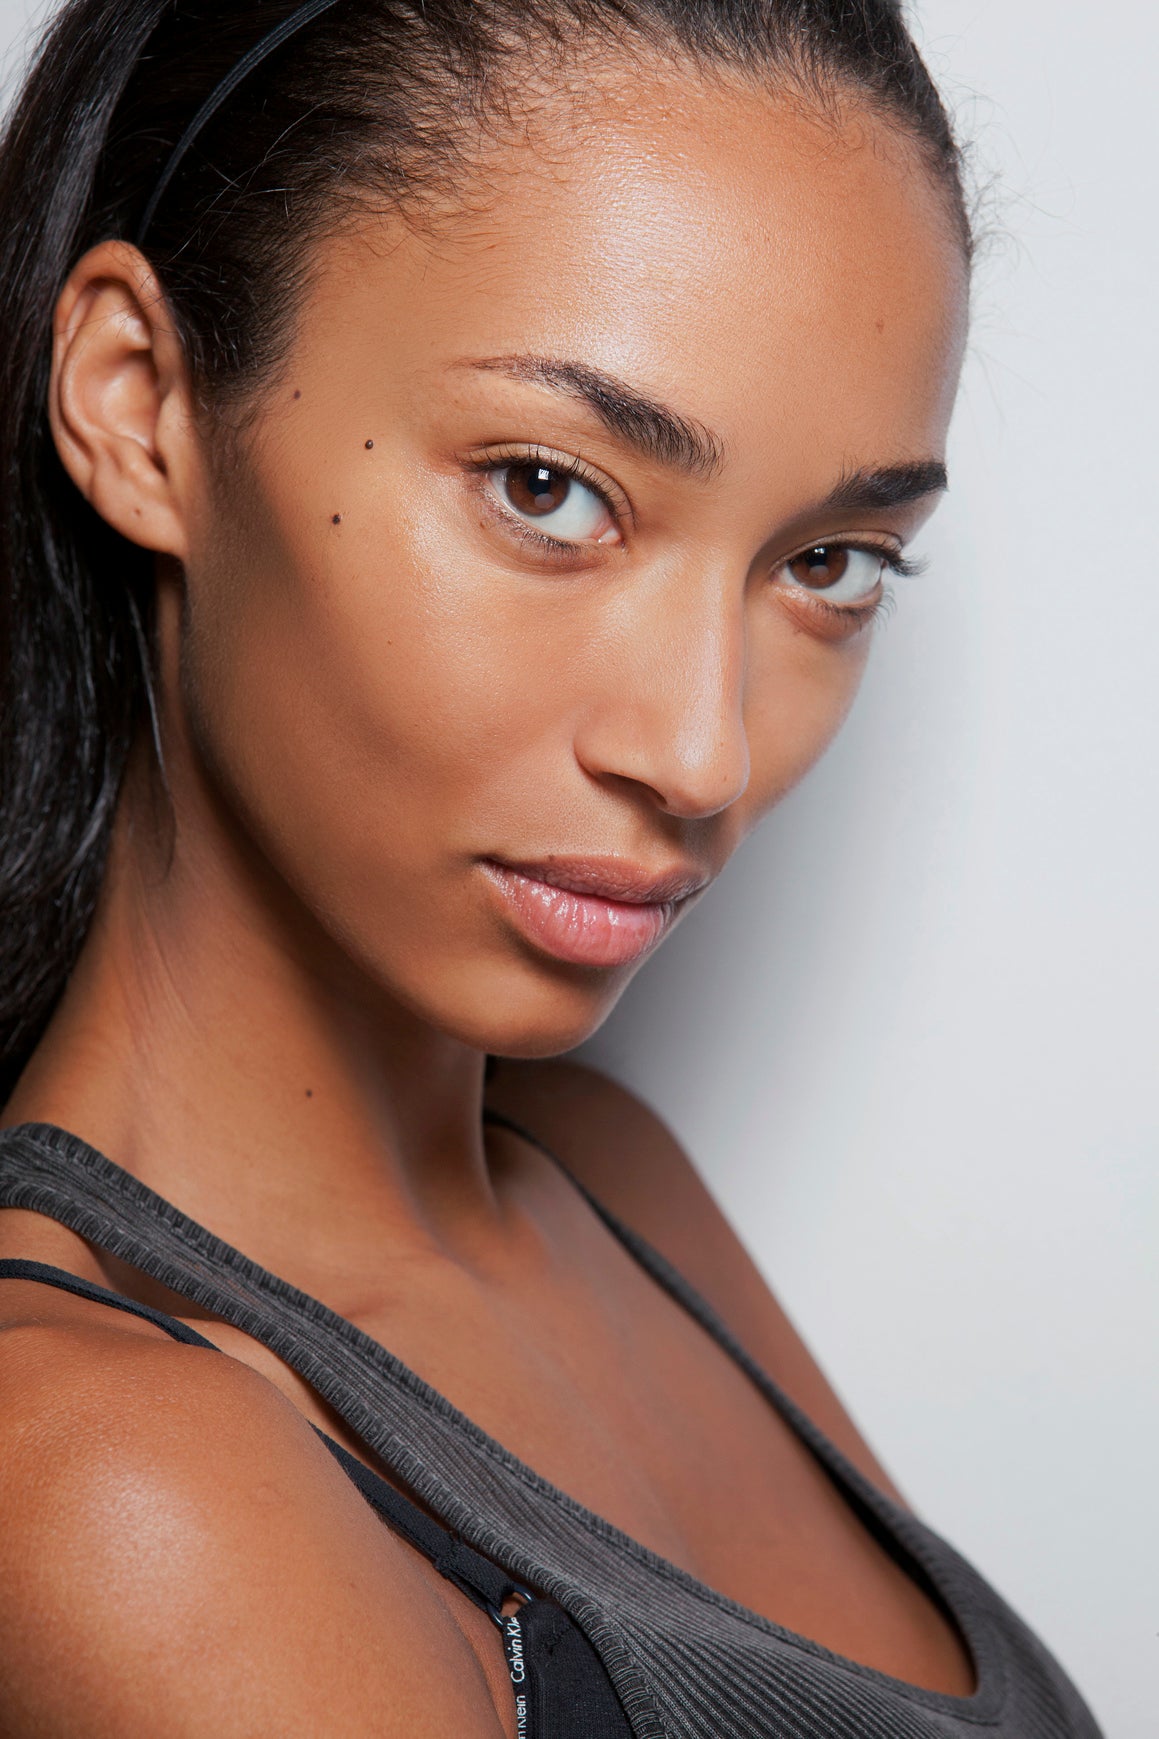 We Asked Dermatologists To Share Their Top Products For Hyperpigmentation
